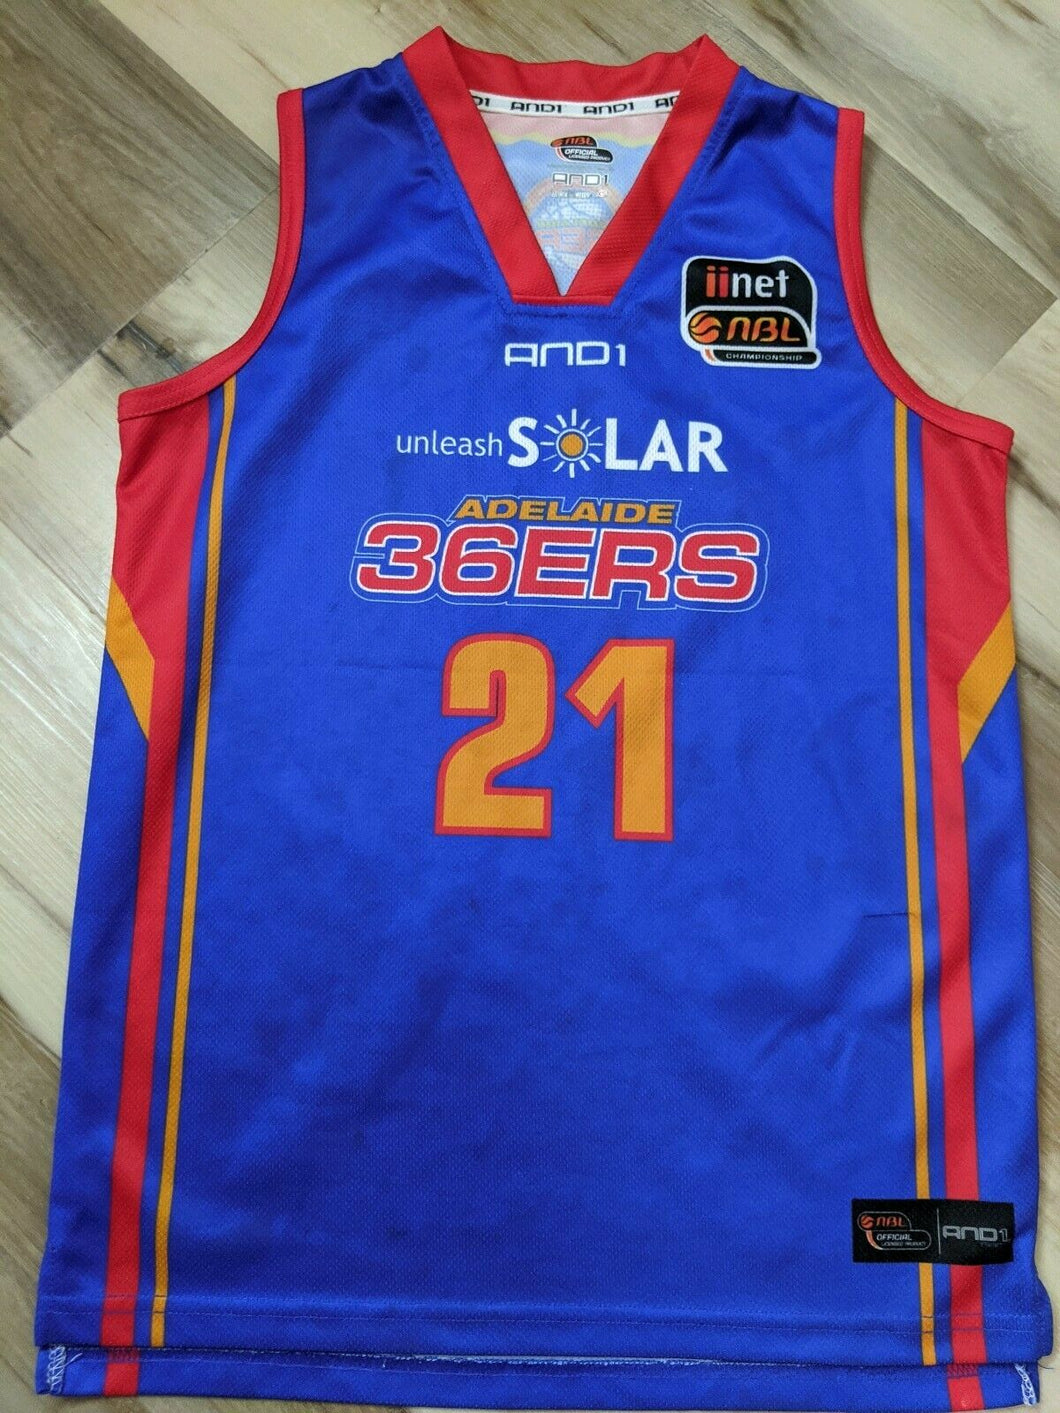 Pre-Owned Jersey - Daniel Johnson 2012 Adelaide 36ers